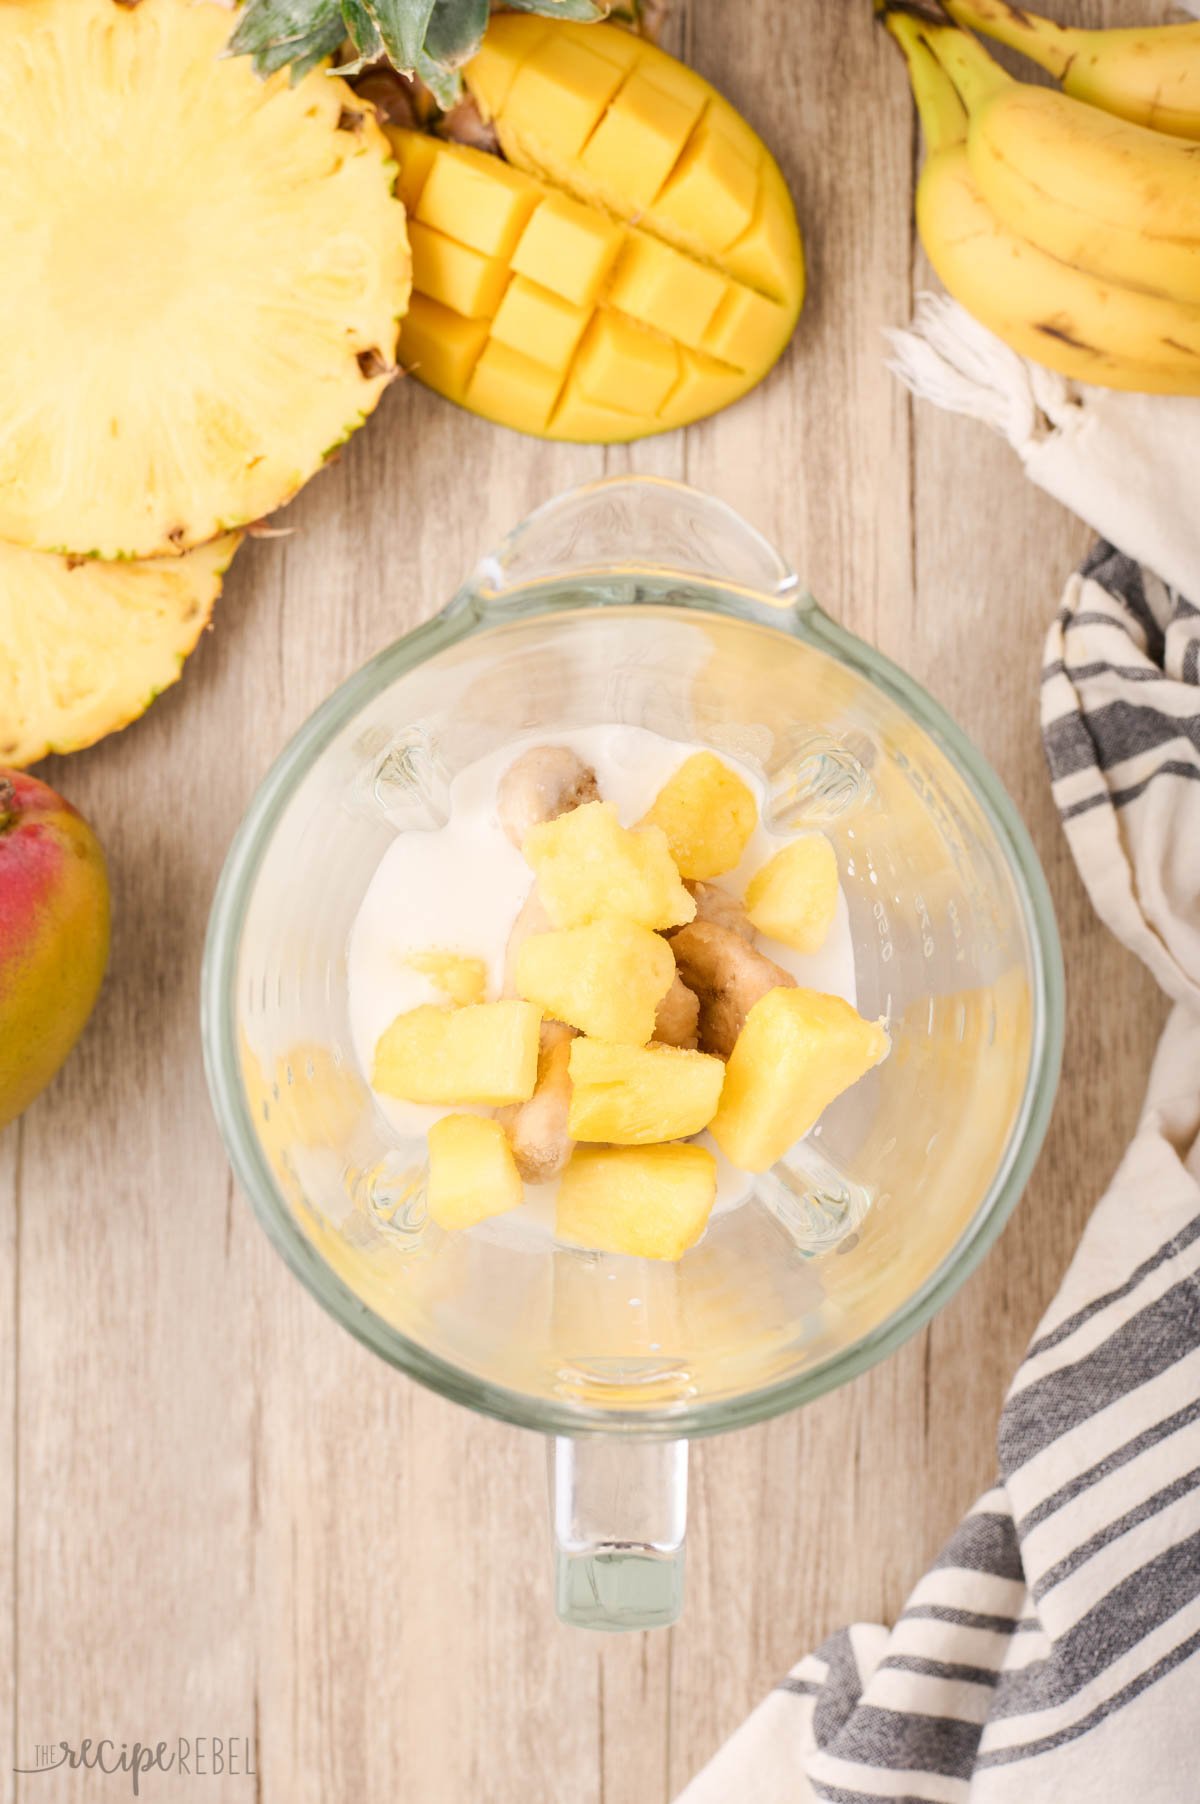 frozen pineapple added to blender to make tropical smoothie